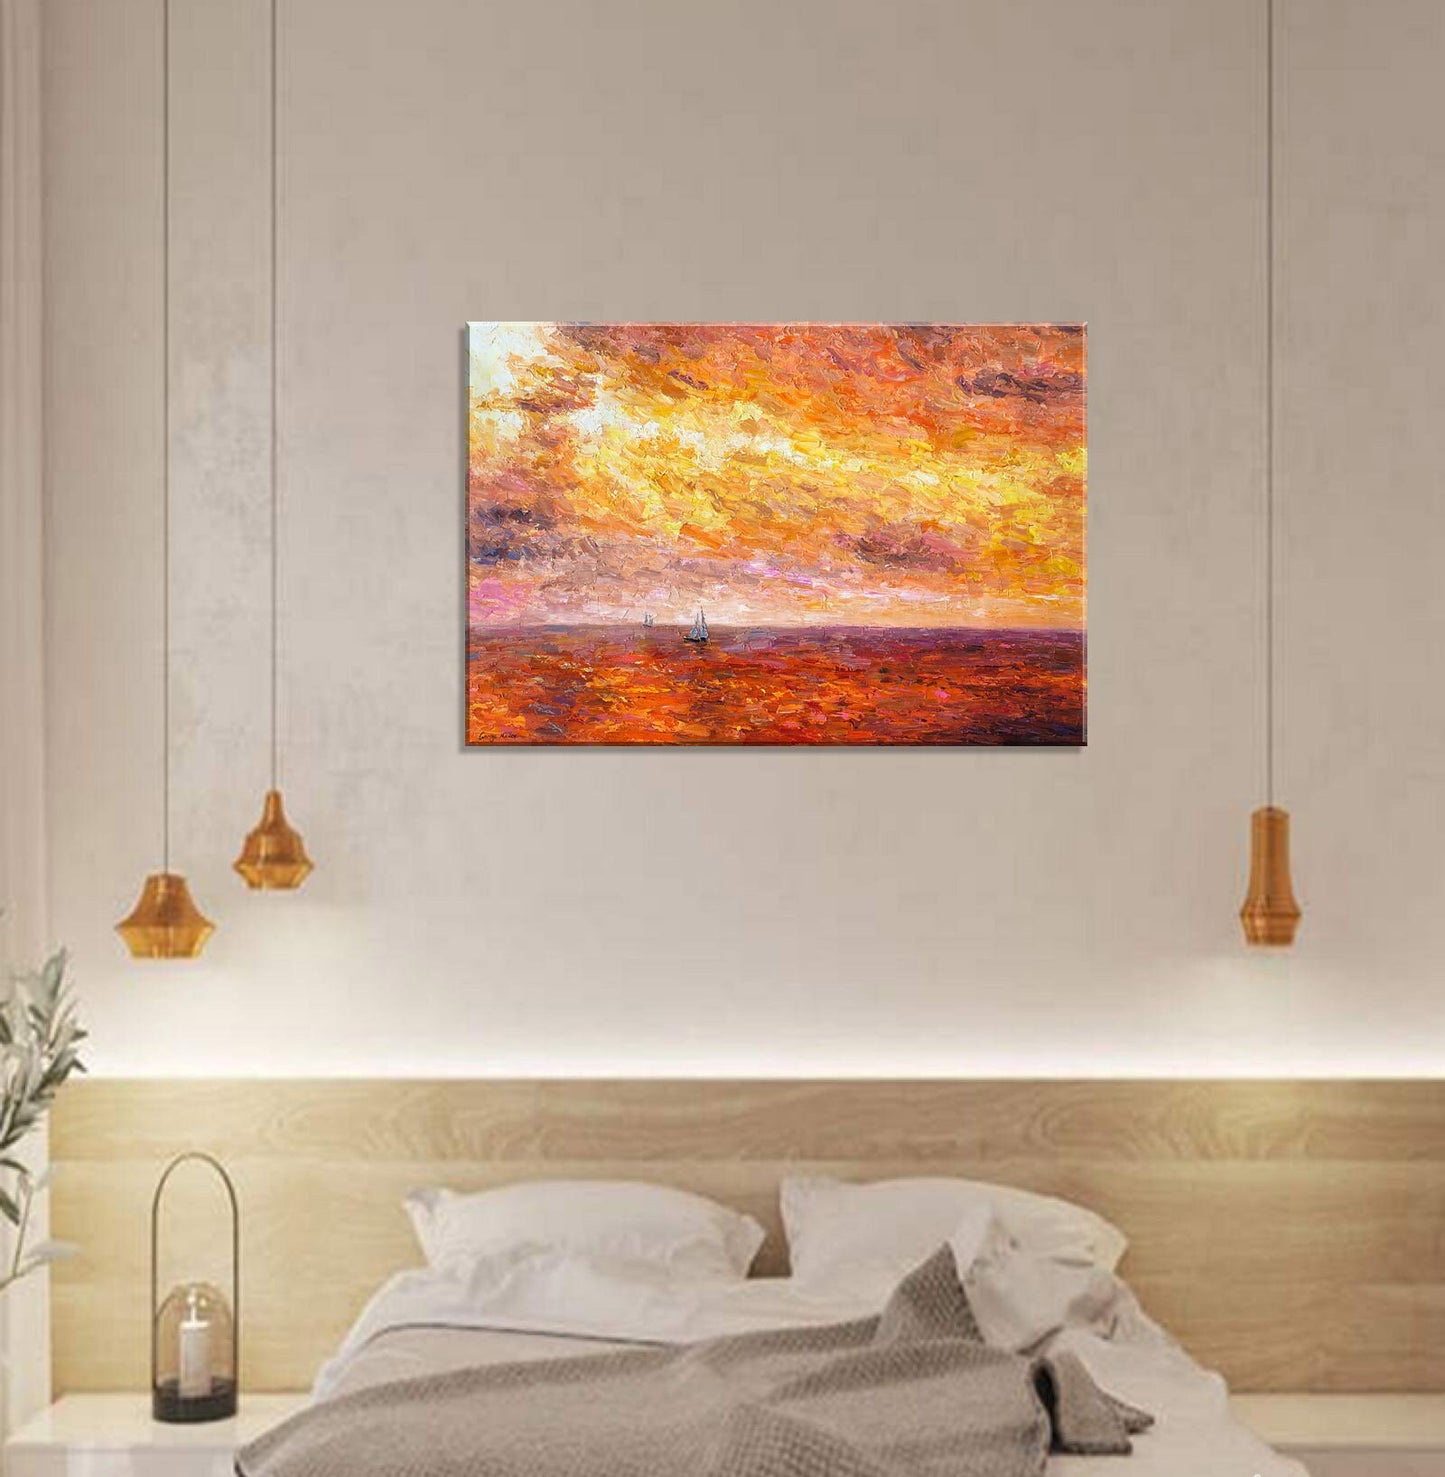 Original Oil Painting: Pacific Sunset Seascape - Modern Wall Art | 32x48 inches, Abstract Painting Seascape, Large Painting, Modern Wall Art